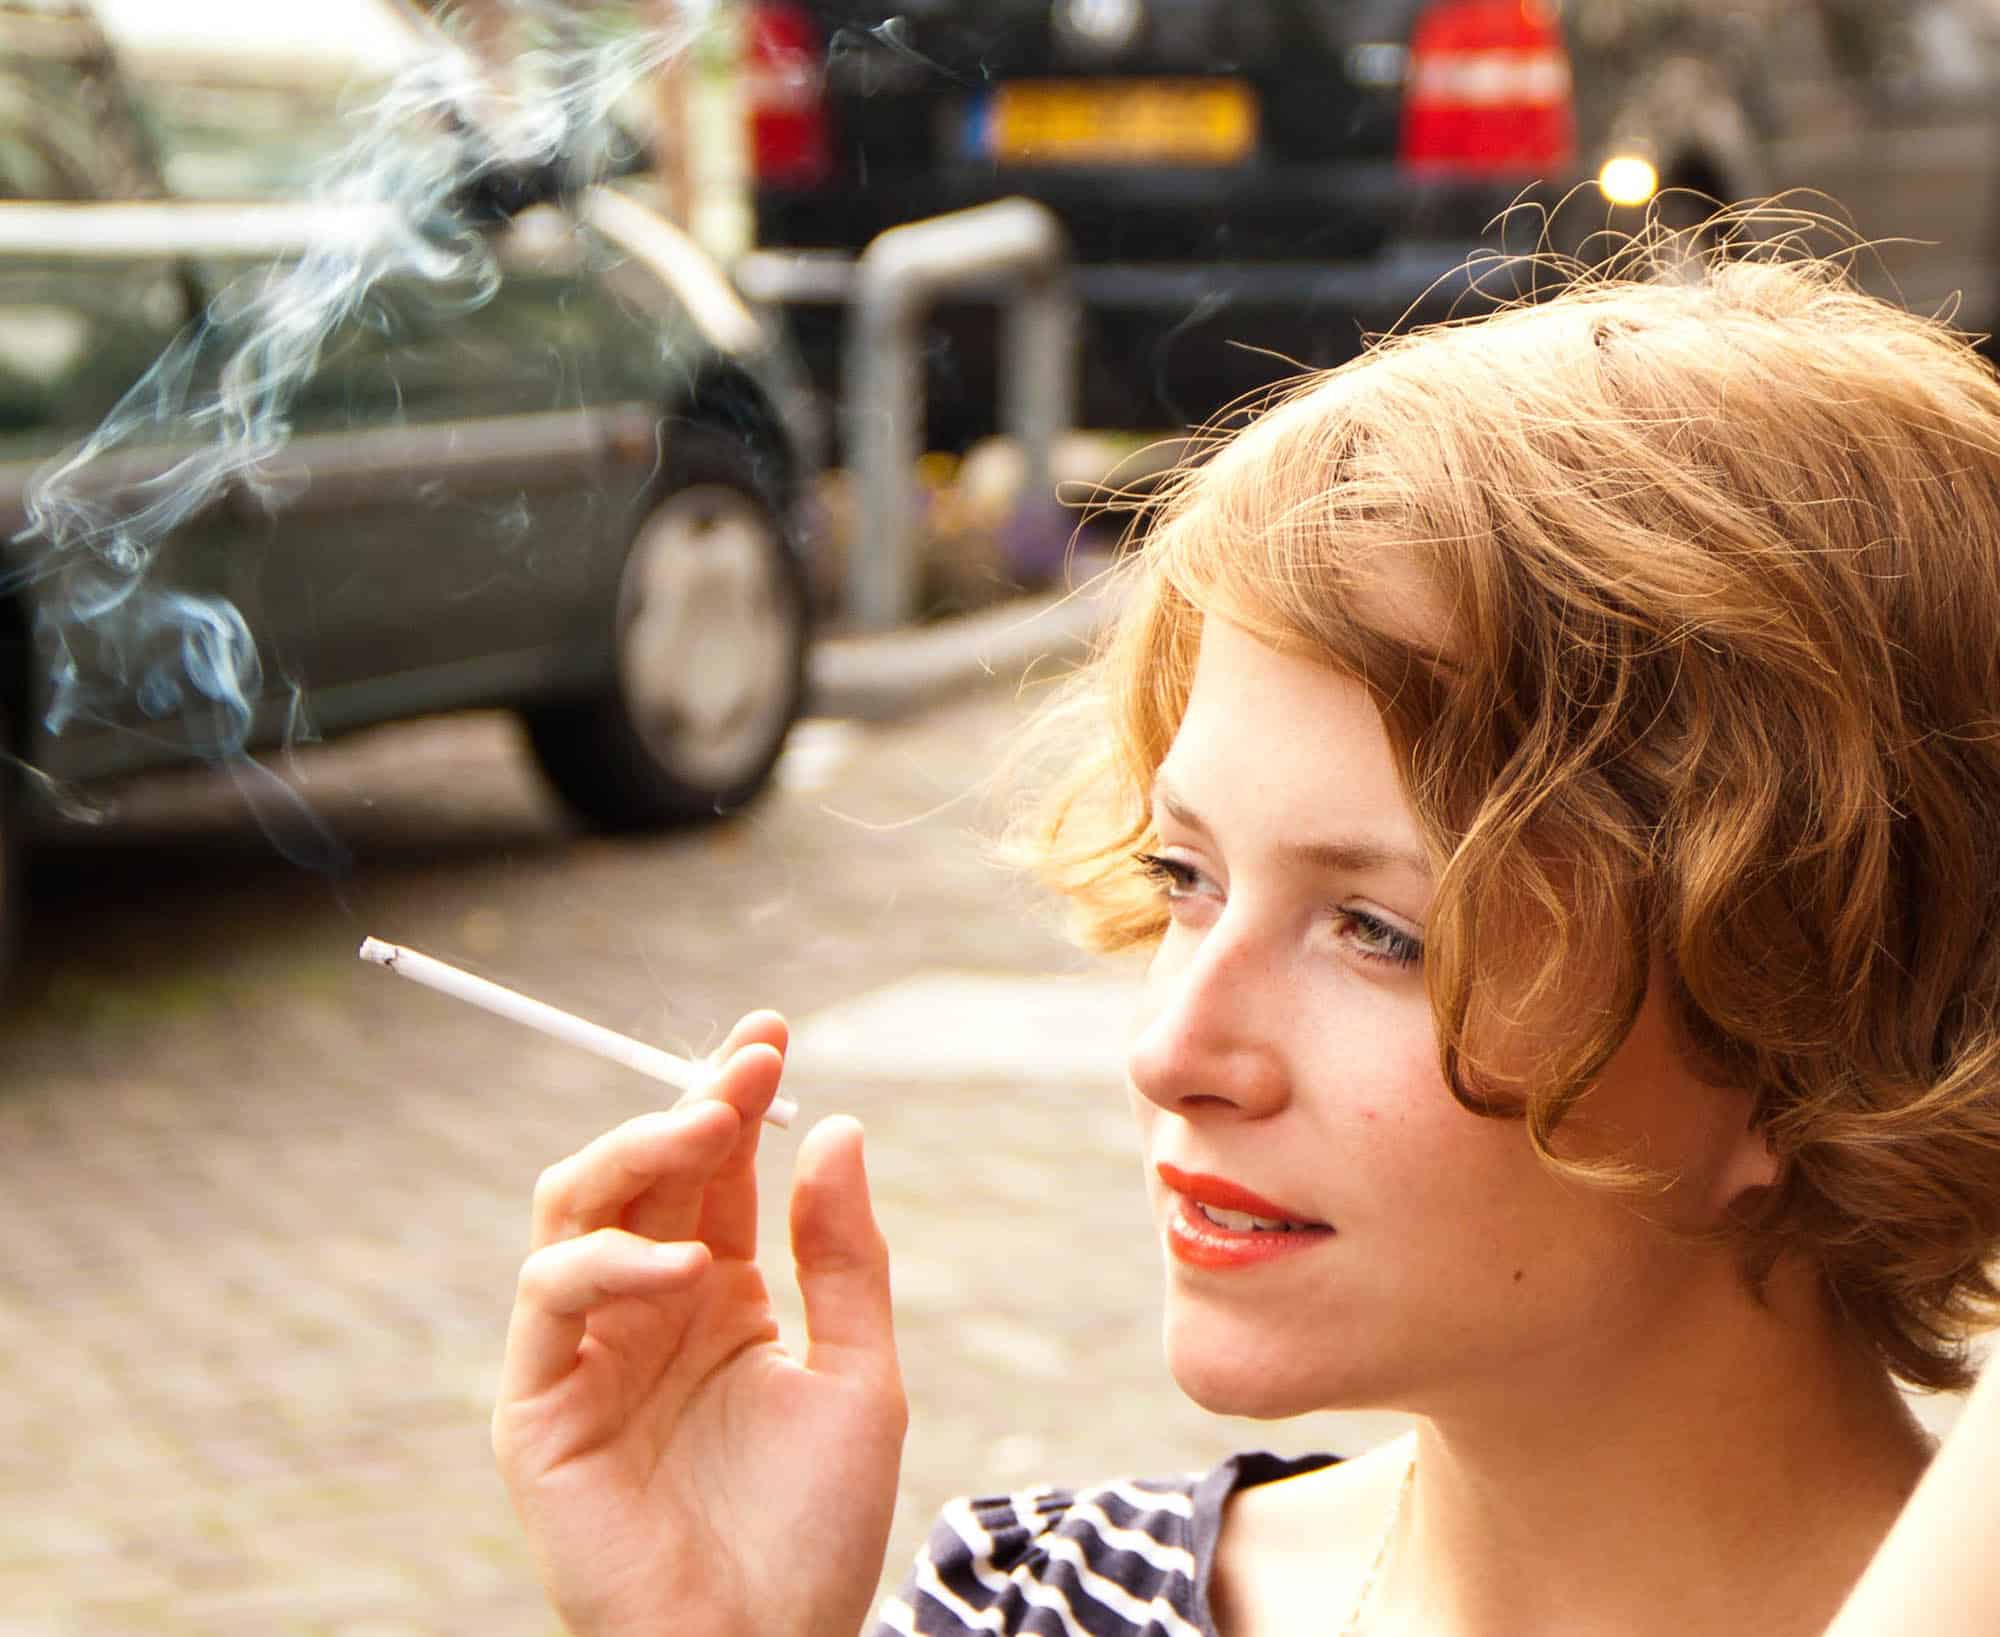 The French and Their Cigarettes: The Growing Anti-Smoking Movement in France